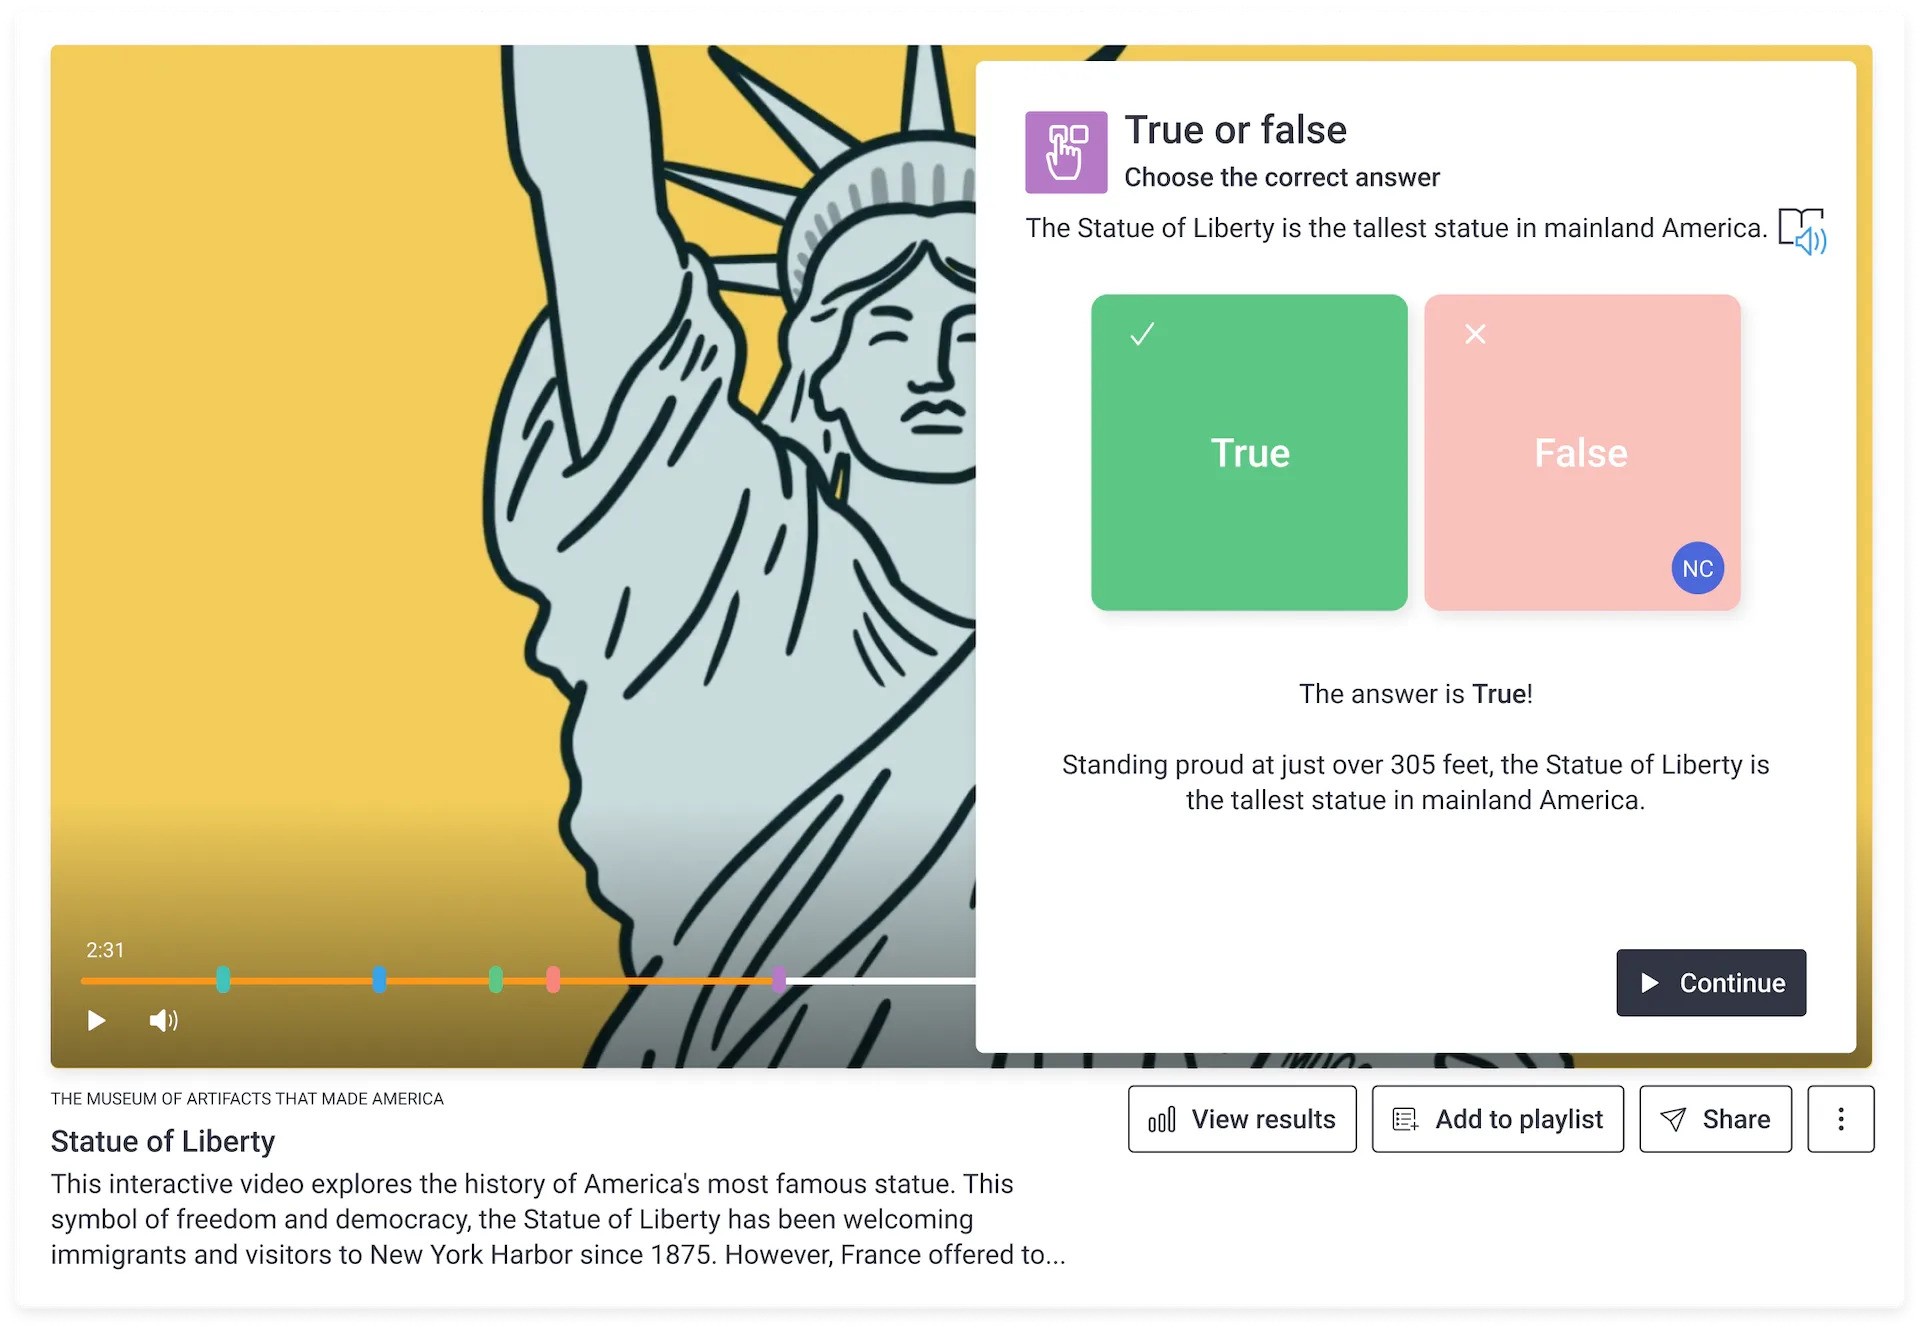 Turn any video into an interactive quiz to keep your students engaged and capture insights into their learning.